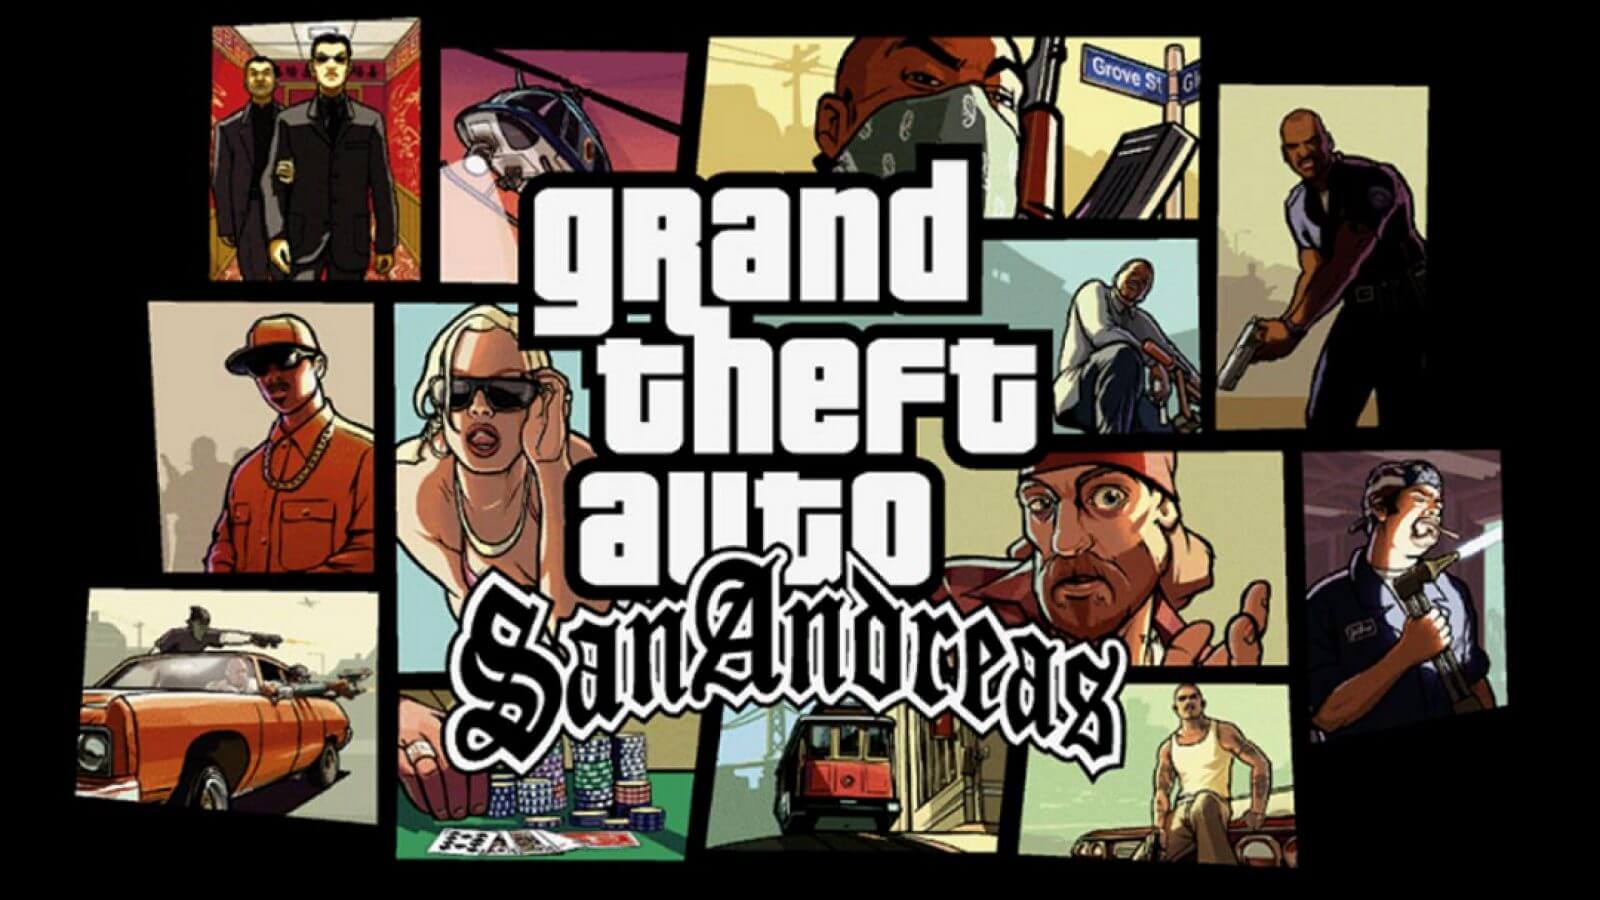 download gta san andreas for pc free full game 600mb